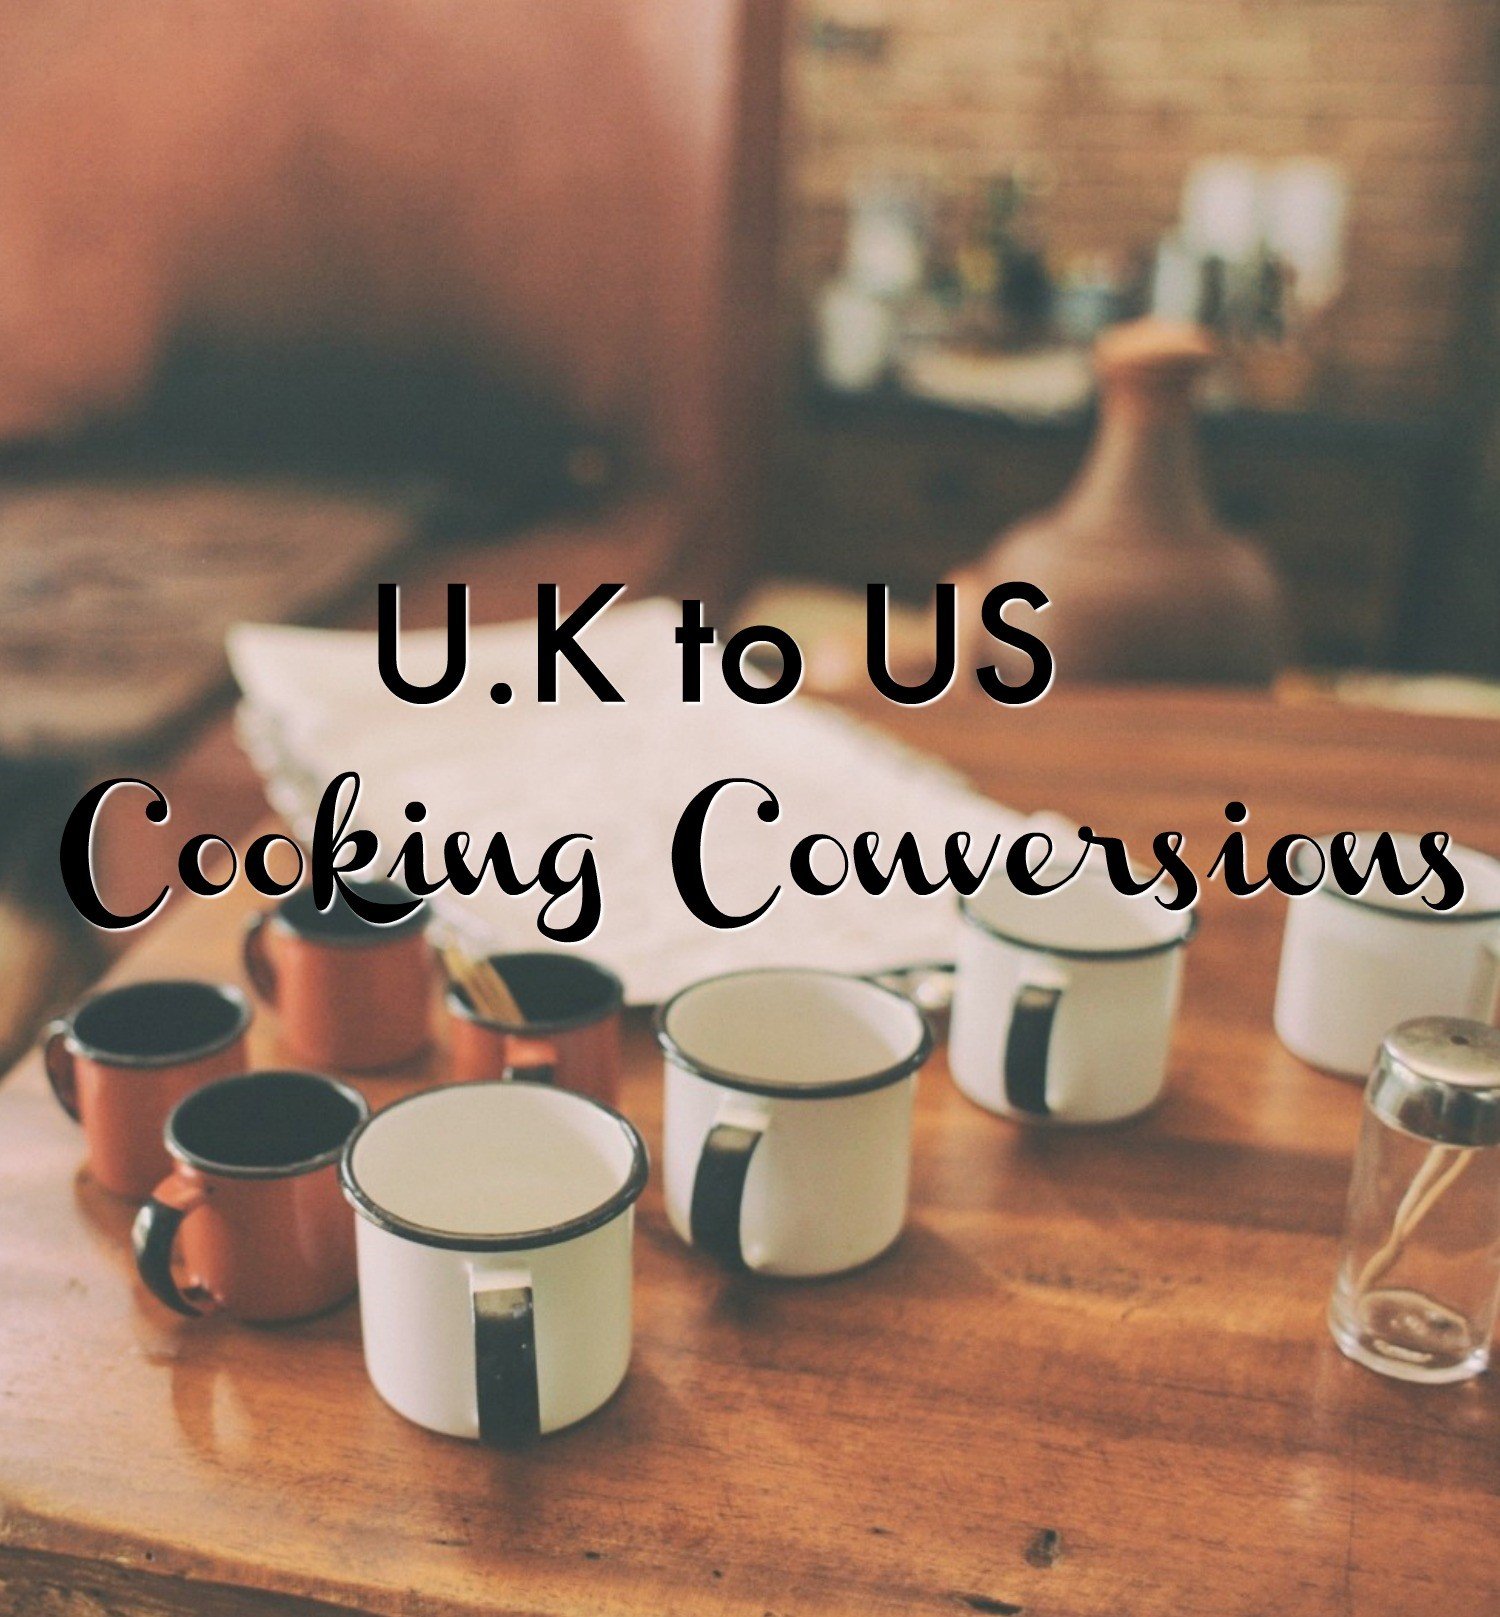 U.K to US cooking conversions